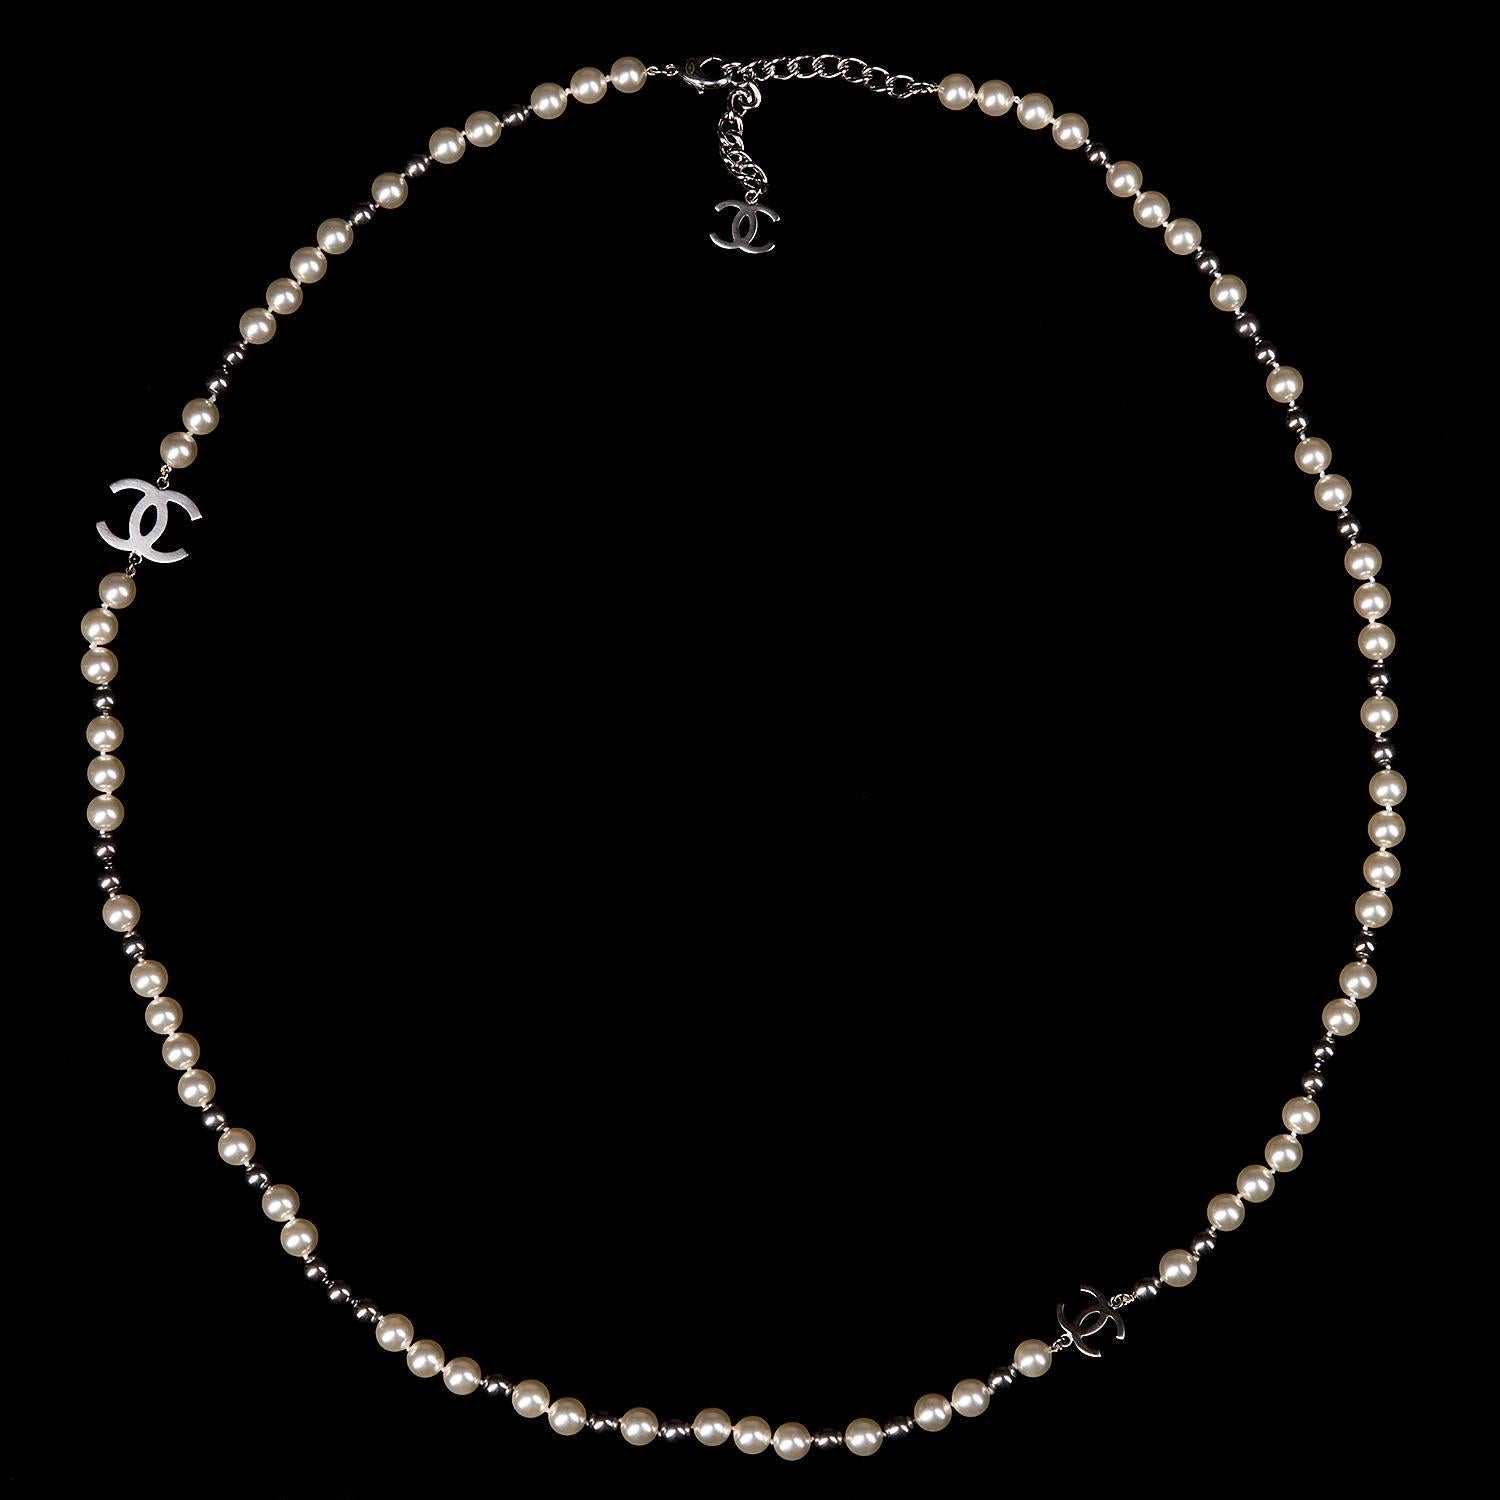 This Chanel necklace is such a beautiful elegant piece. Never worn it is in absolutely pristine condition. The large faux pearls are indispersed with smaller silver baubles embellished with two, a large & small Chanel 'CC' silver logo. It comes with